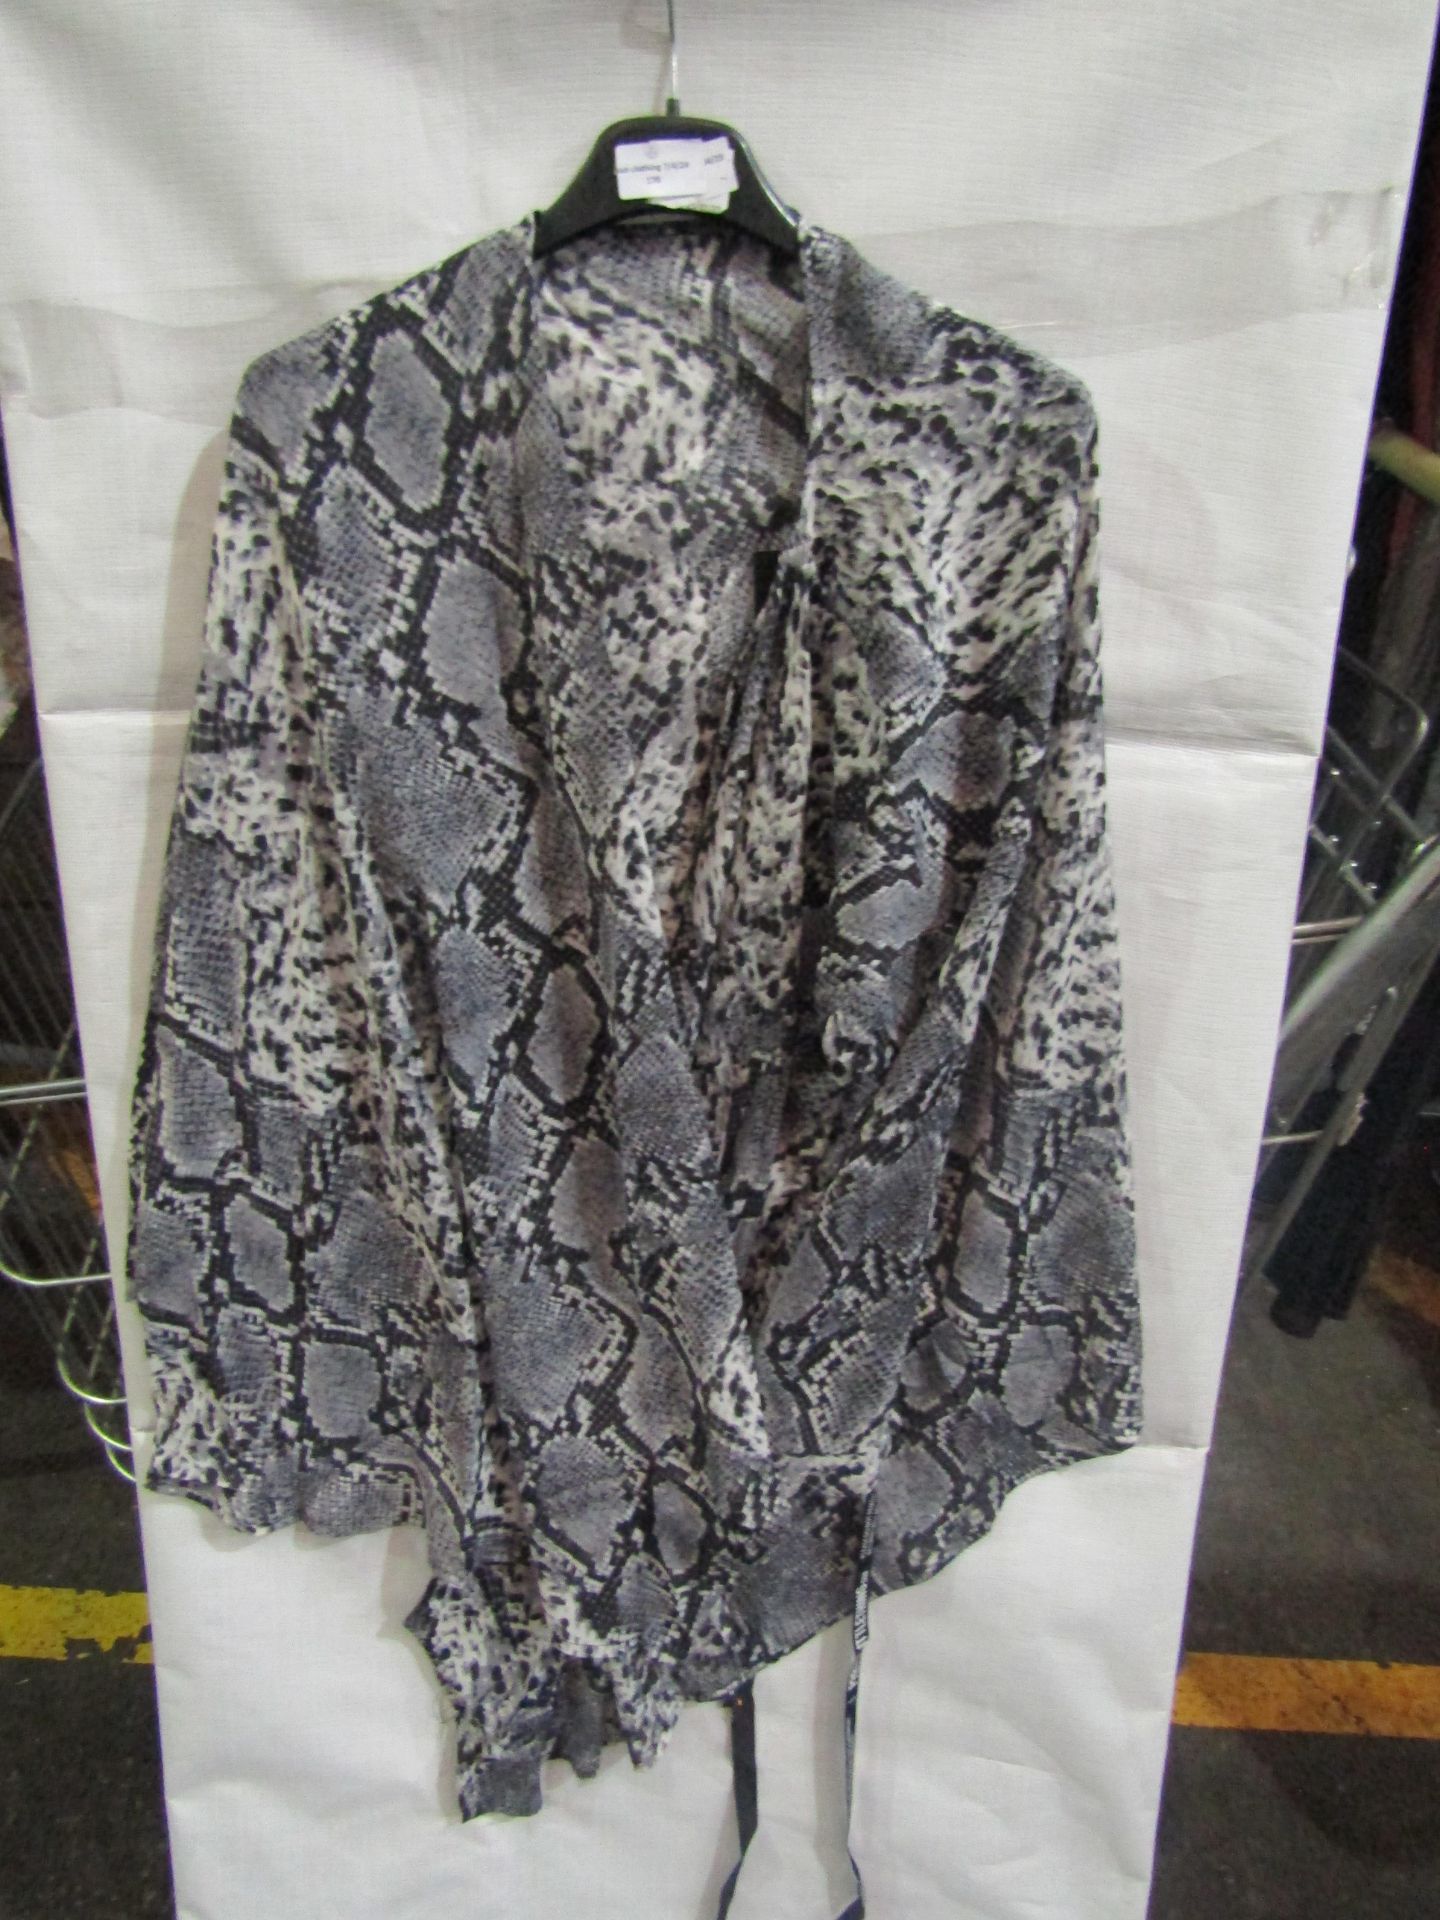 2x Pretty Little Thing Monochrome Snake Wrap Shirt - Size 10, New & Packaged.